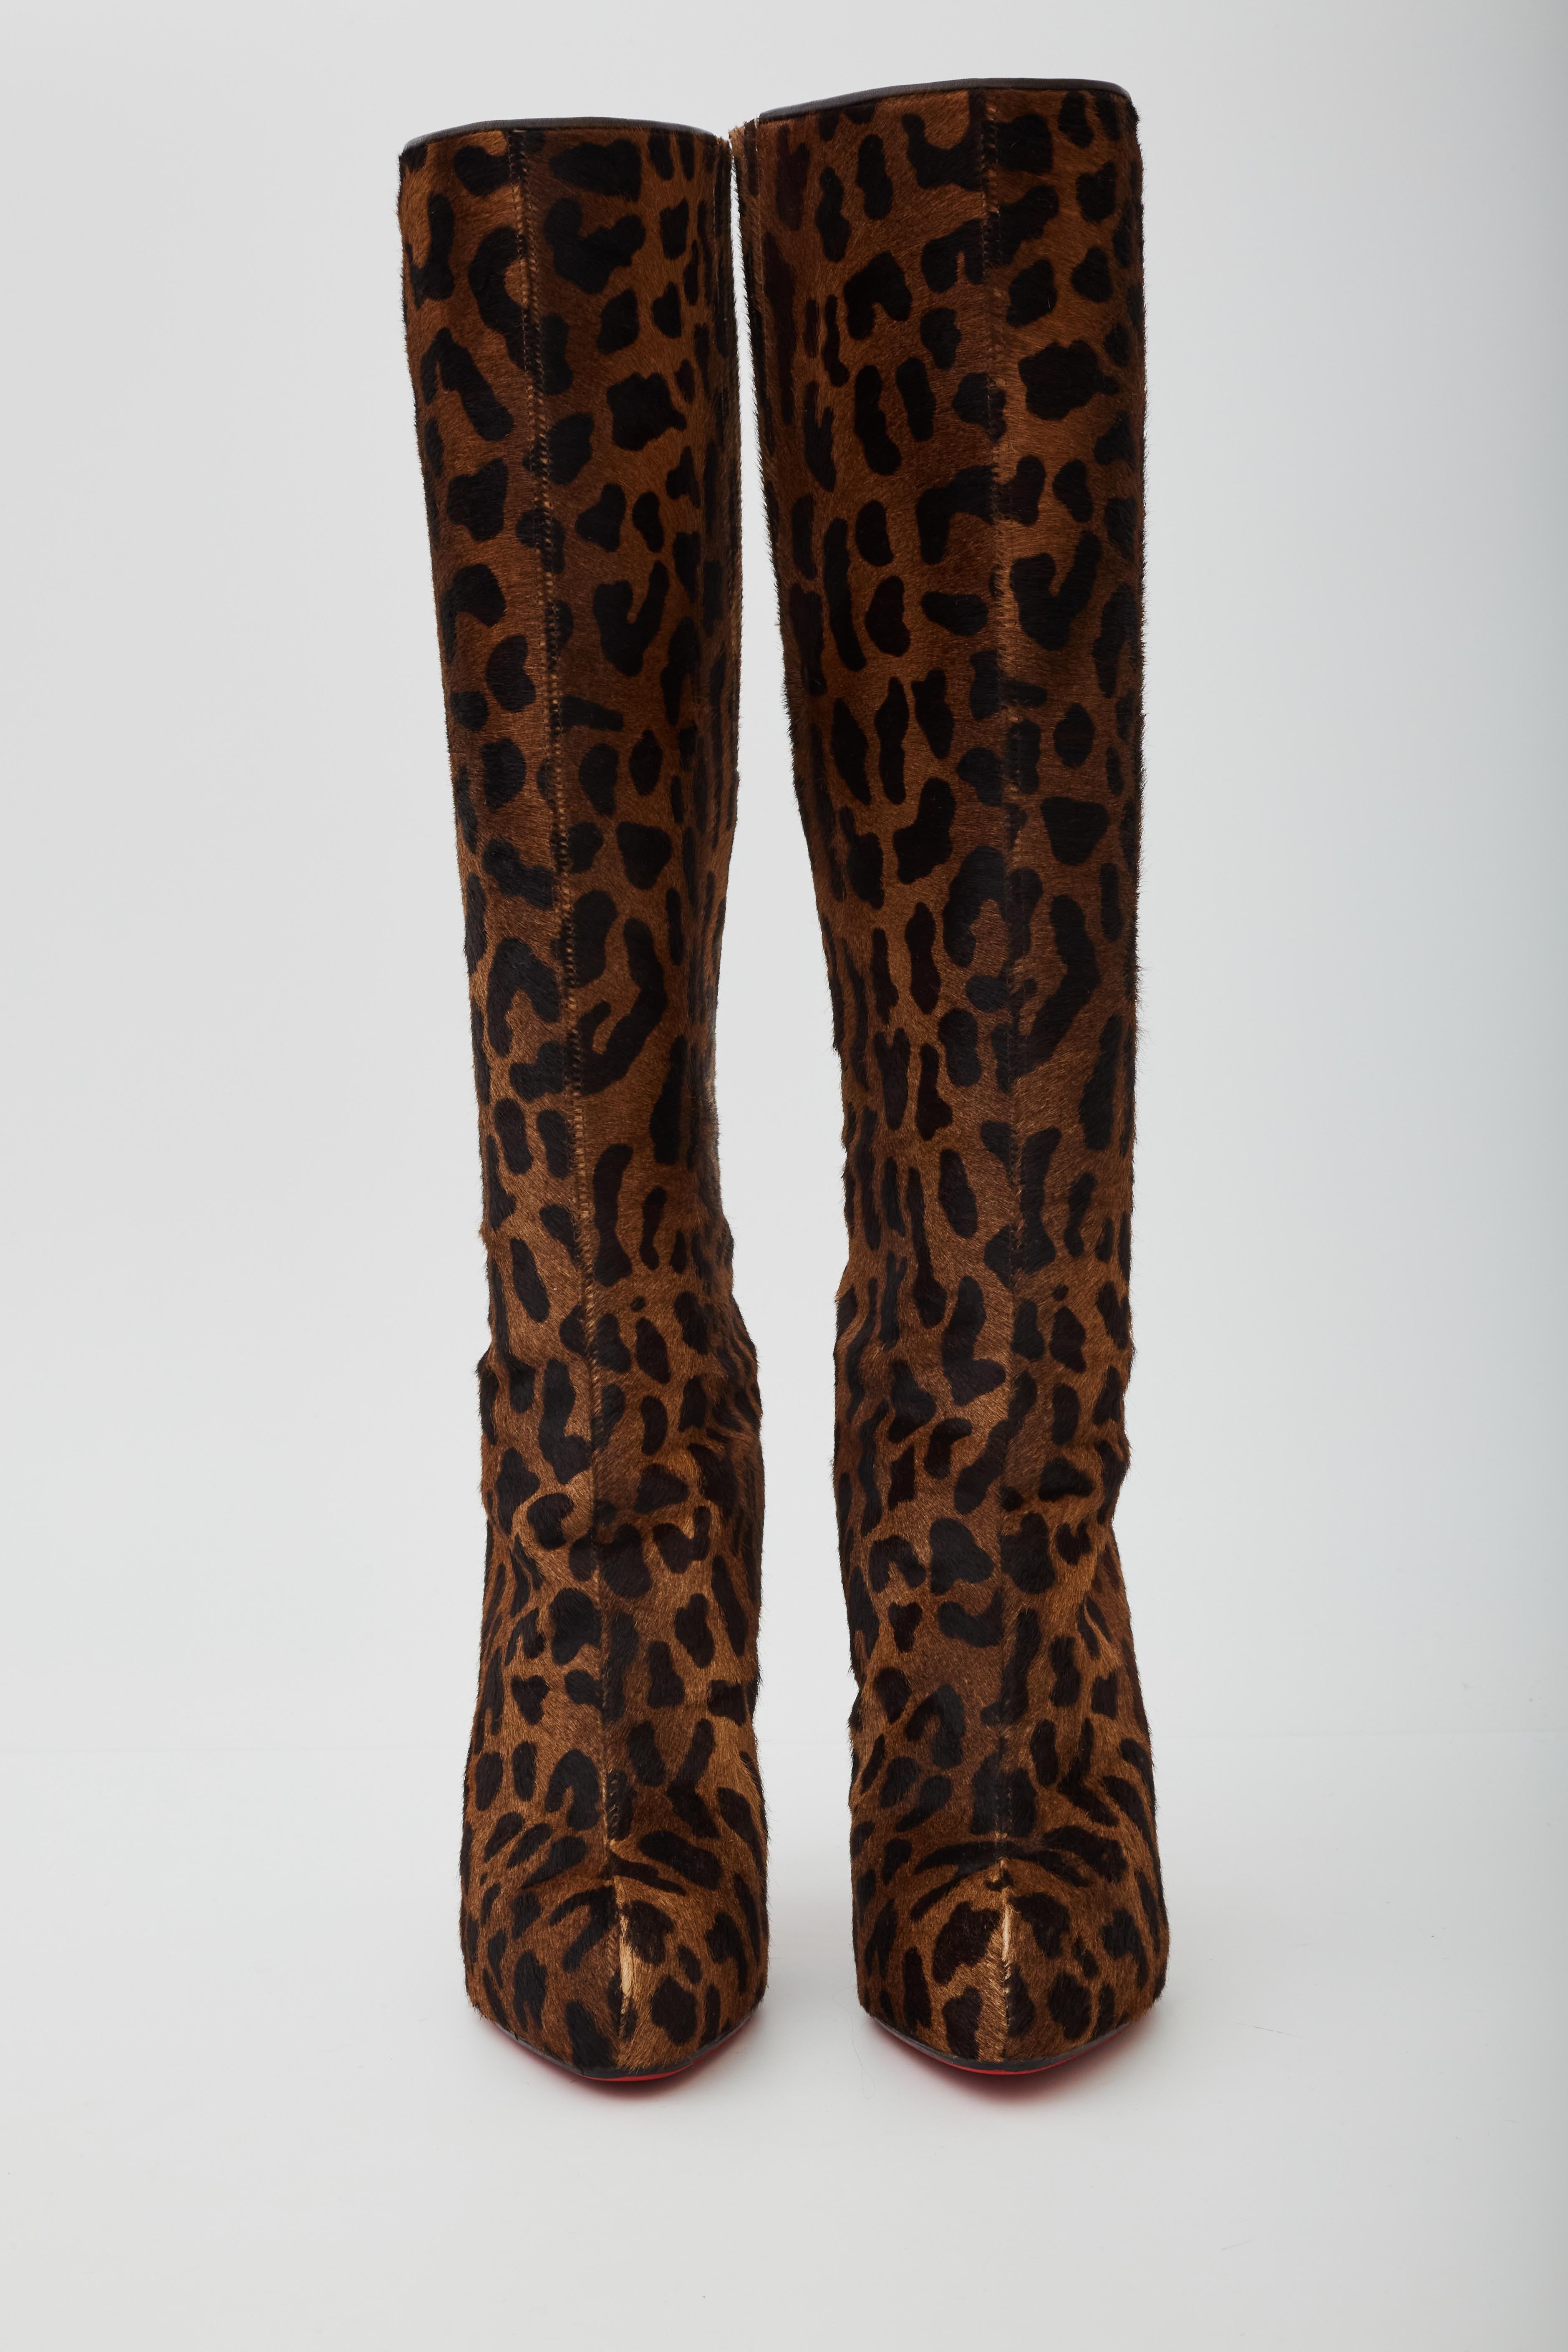 COLOR: Brown/leopard print
MATERIAL: Ponyhair
SIZE: 37 EU / 6 US
HEEL HEIGHT: 110 mm / 4.5”
HEIGHT OF BOOT LEG: 12